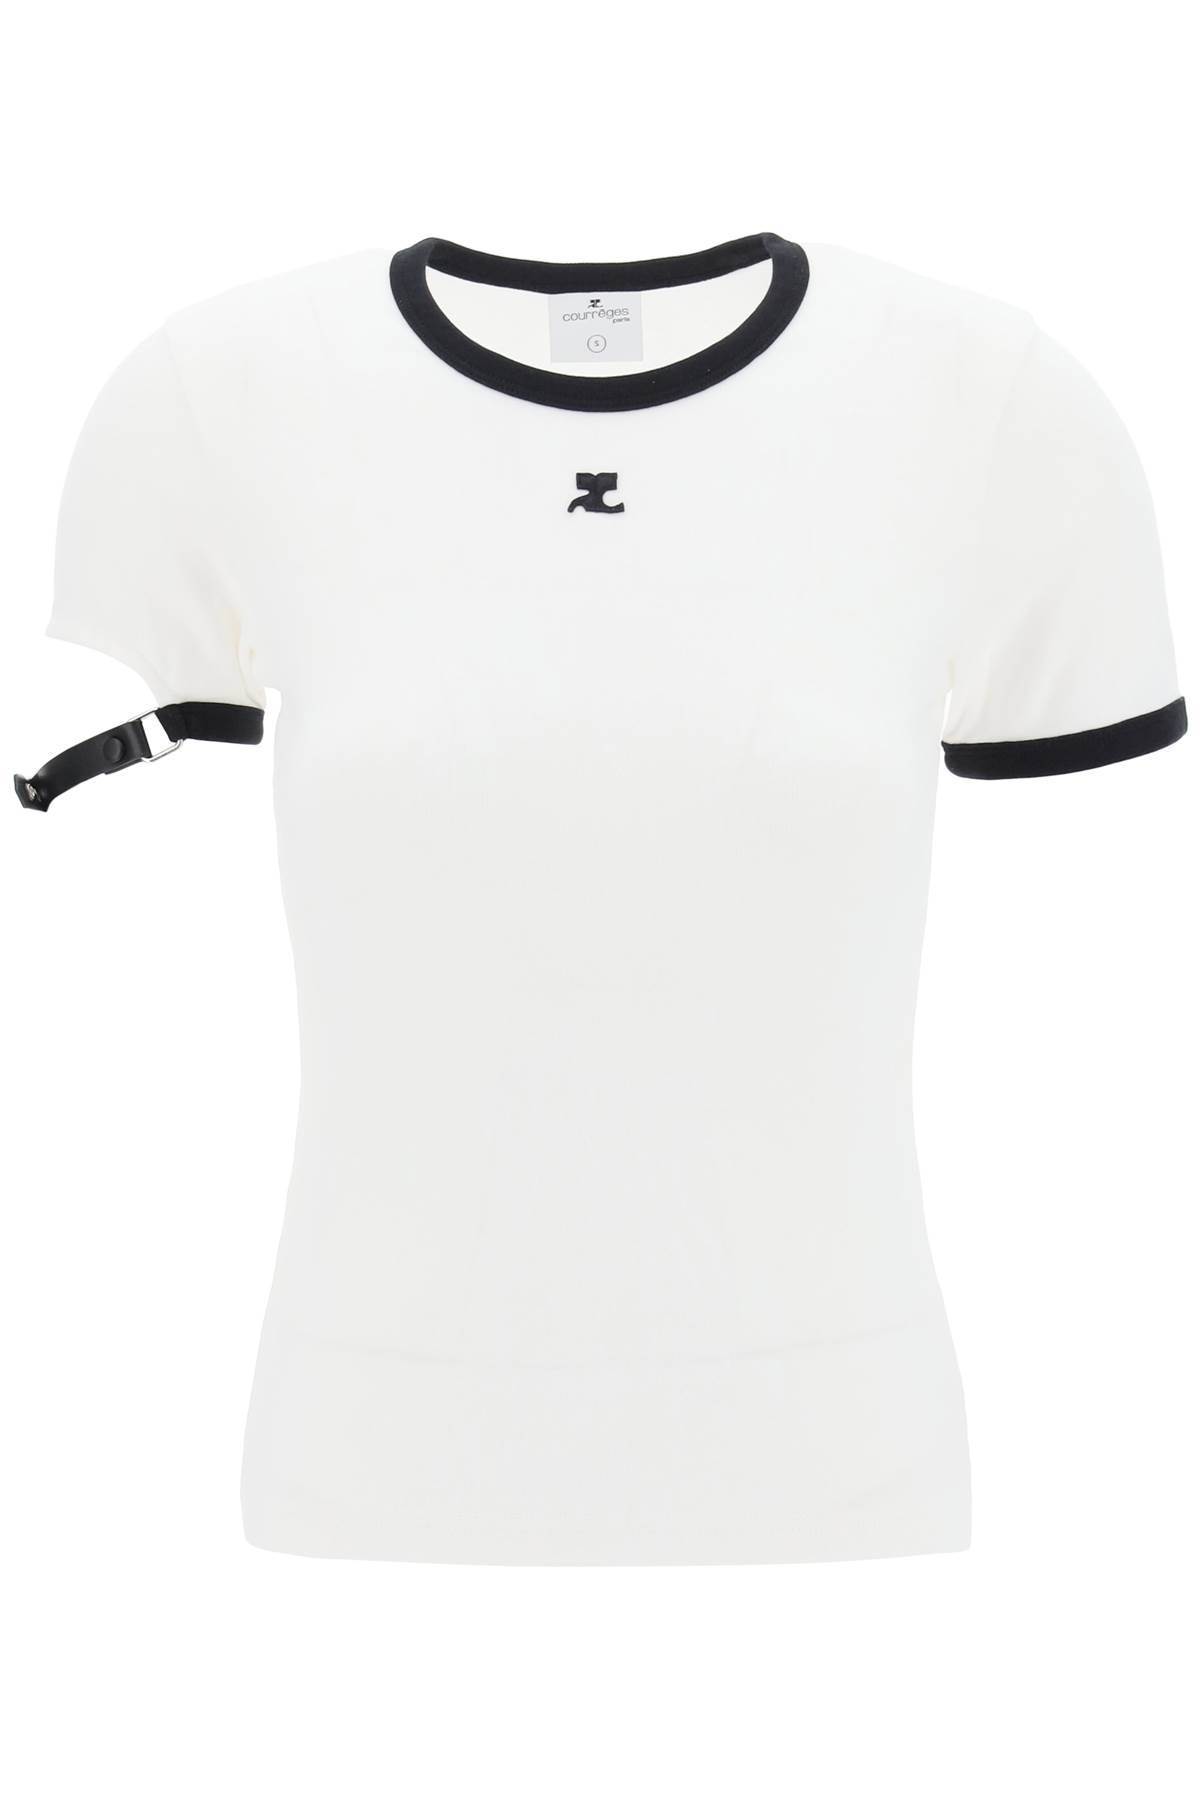 Courrèges COURREGES leather strap t-shirt with sleeve detail.